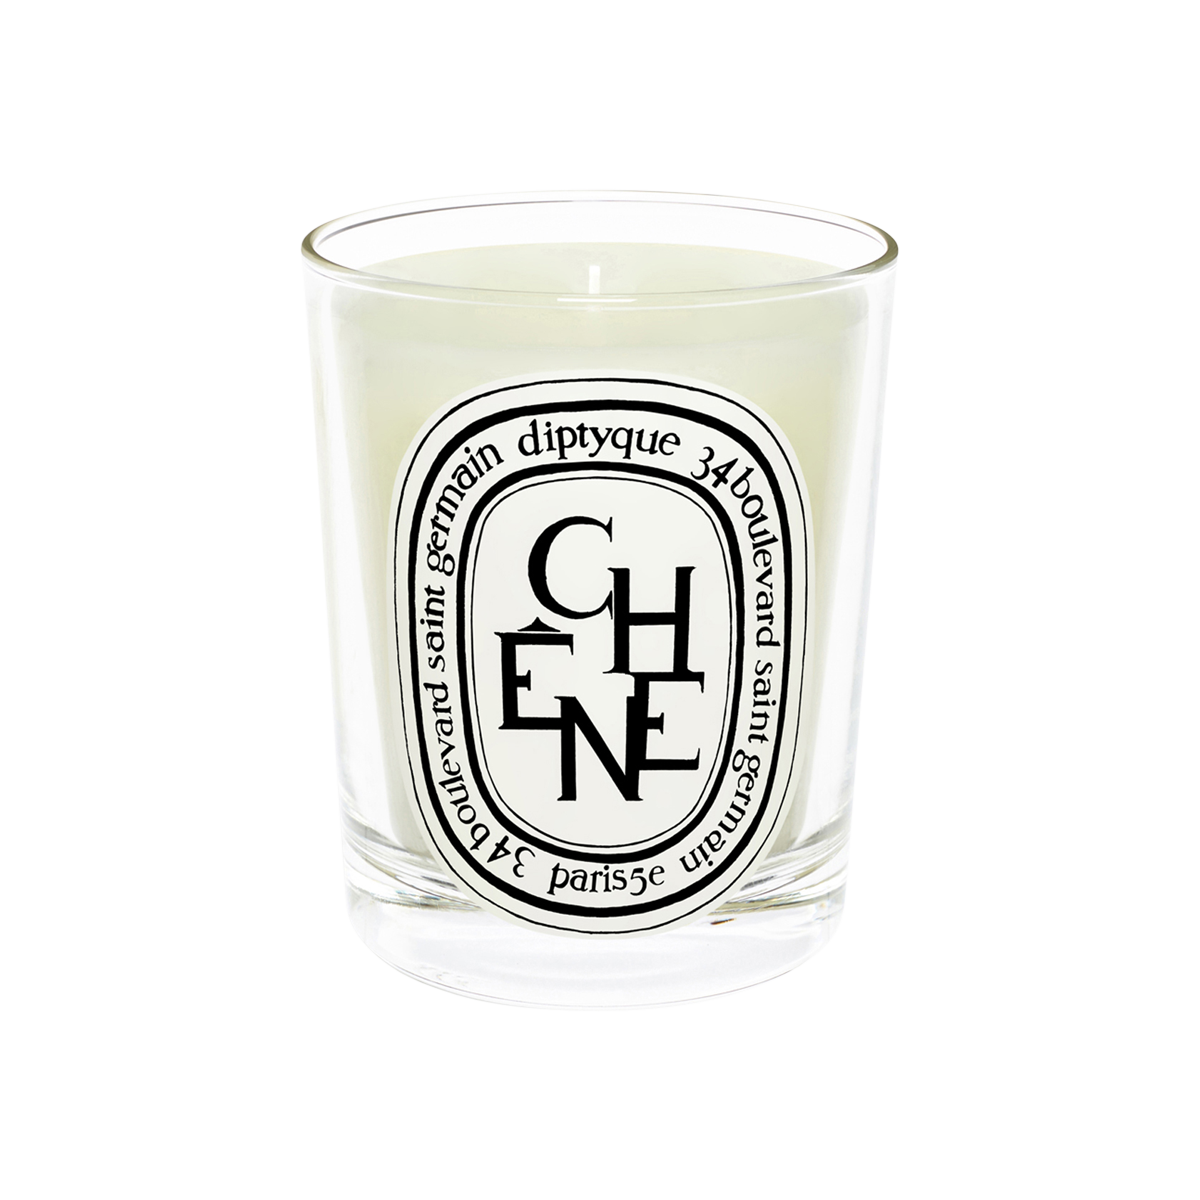 Diptyque - Chene Scented Candle